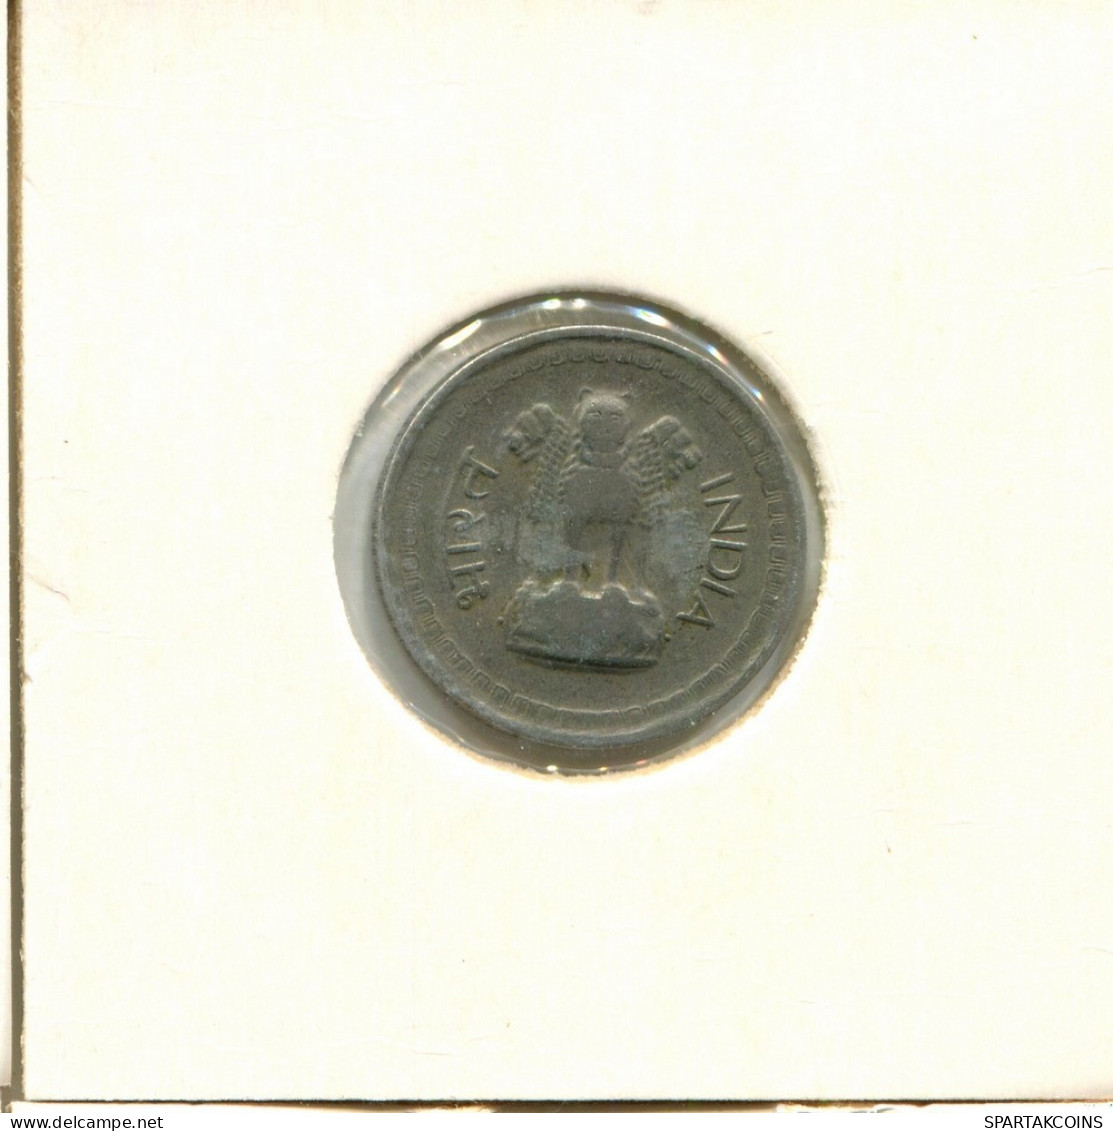 25 PAISE 1973 INDIEN INDIA Münze #AY769.D.A - Inde